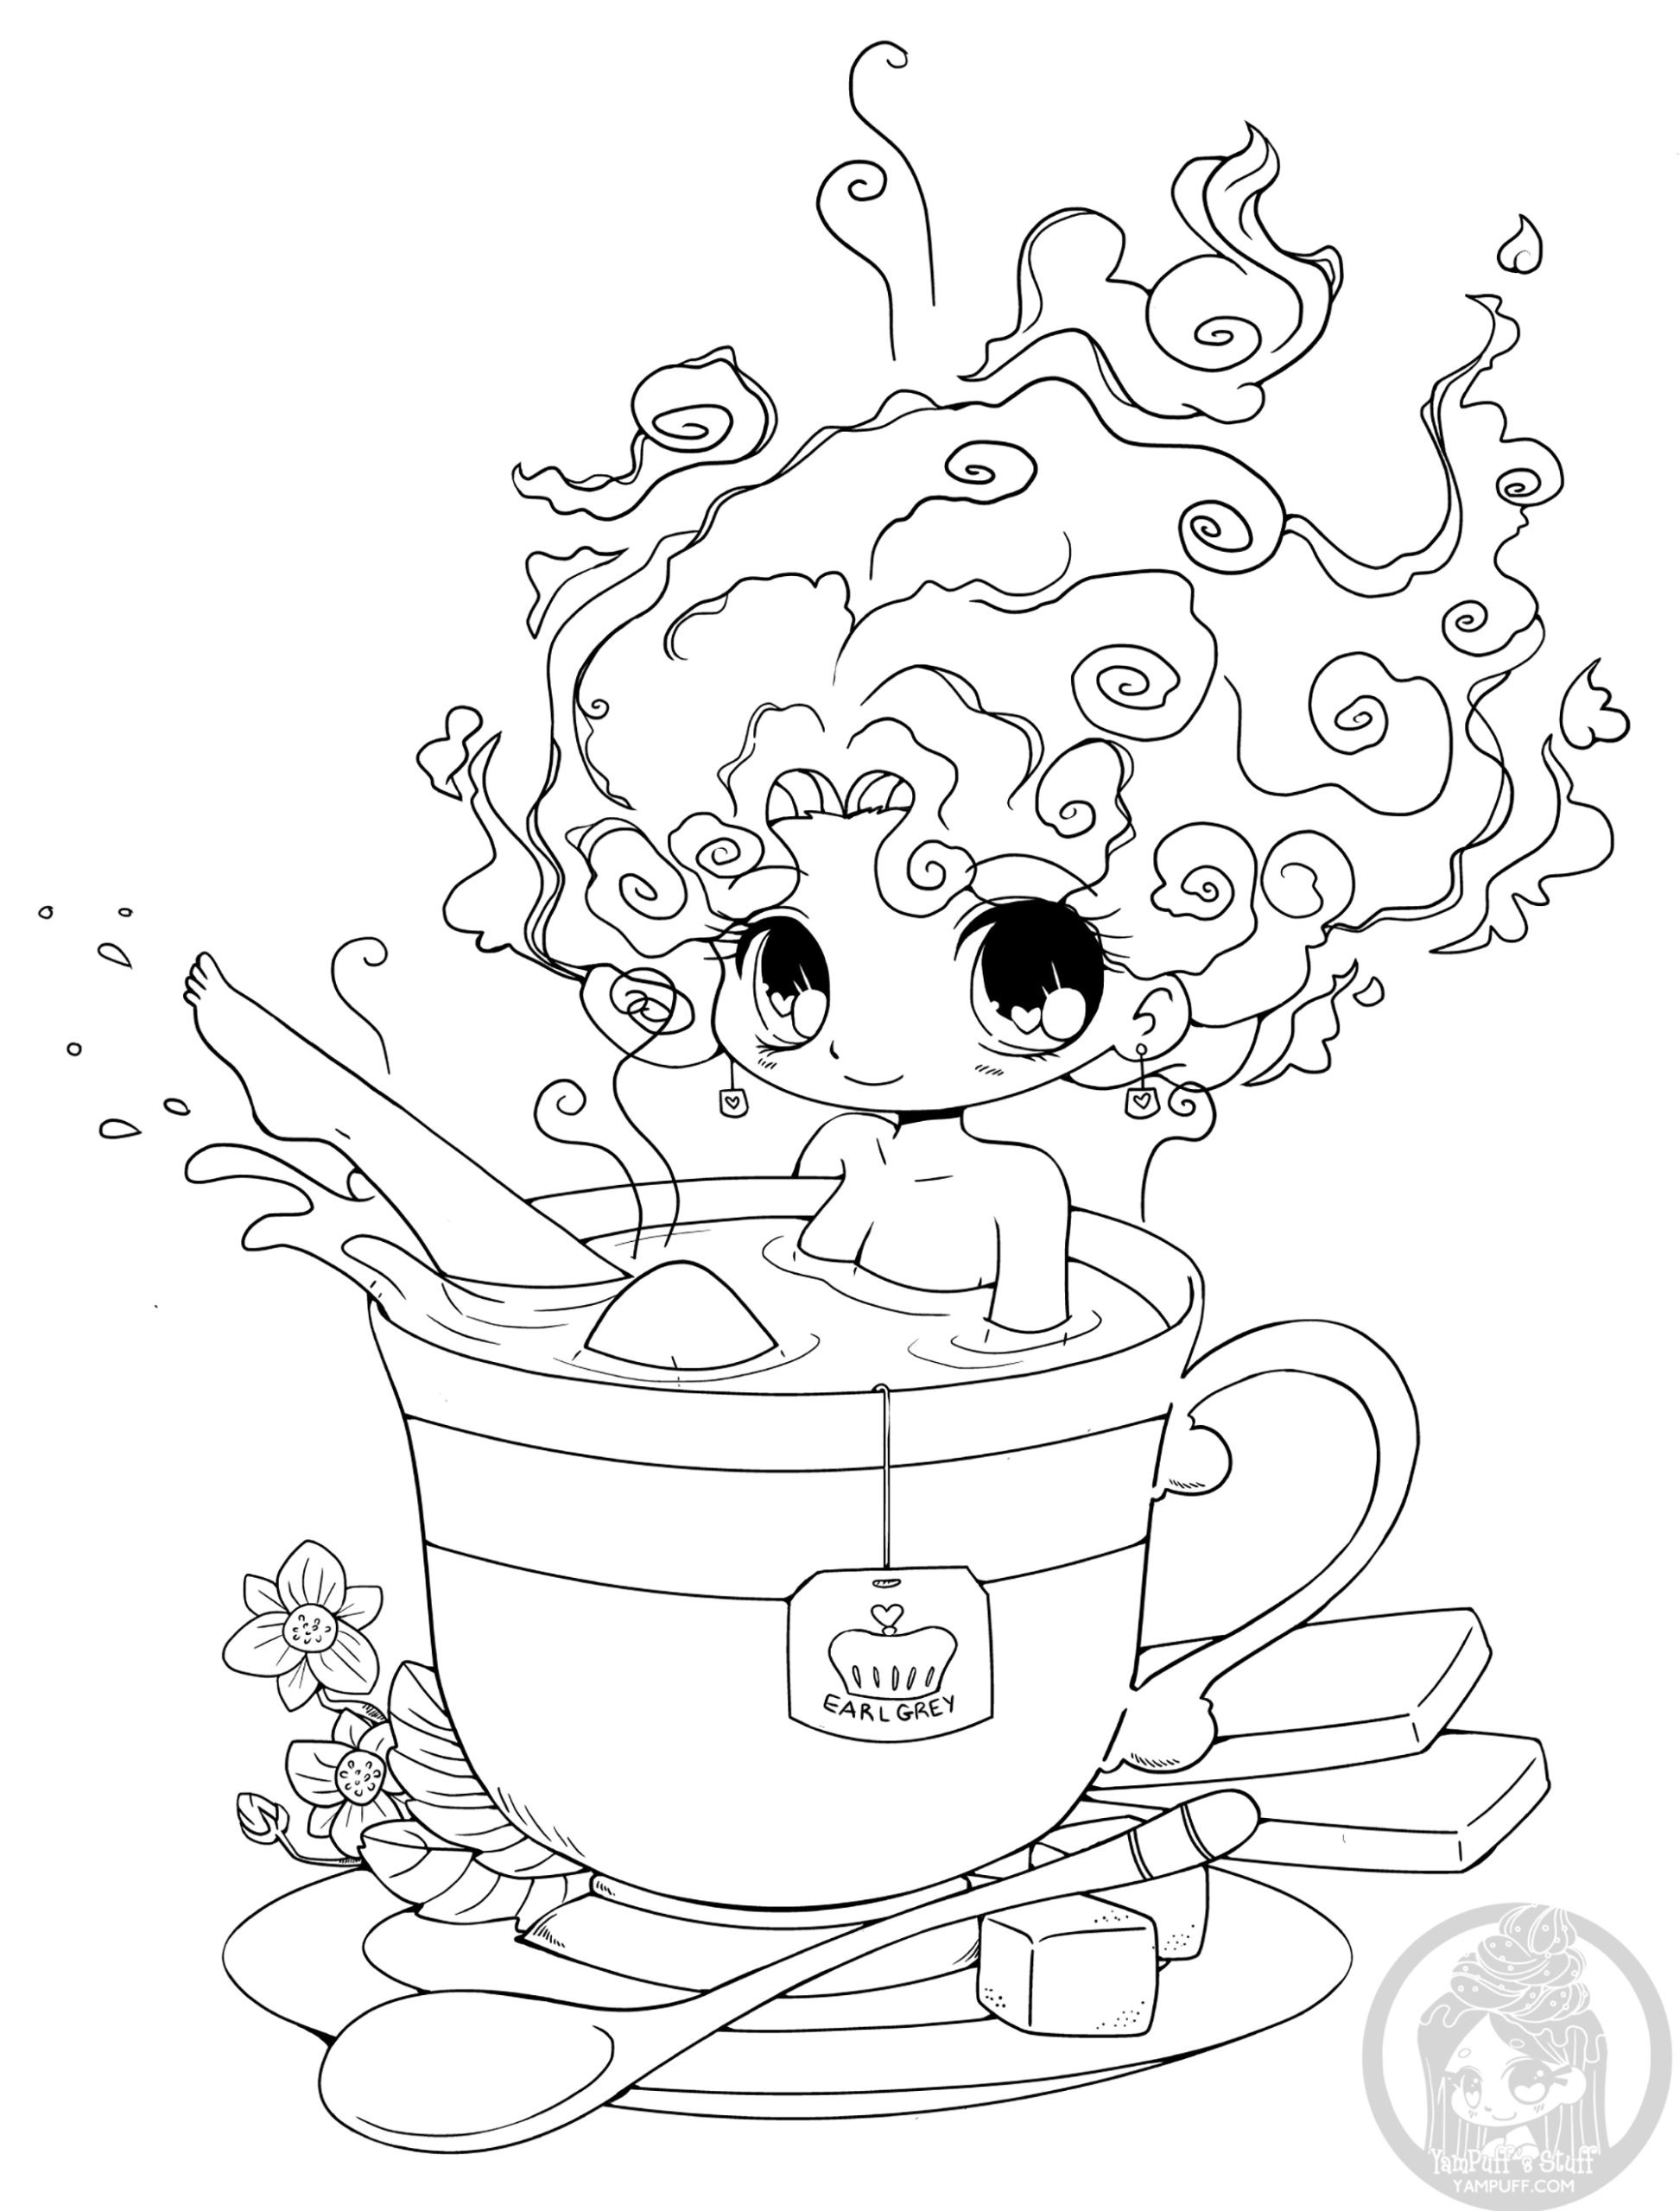 Cool Stuff Coloring Pages - Coloring Home